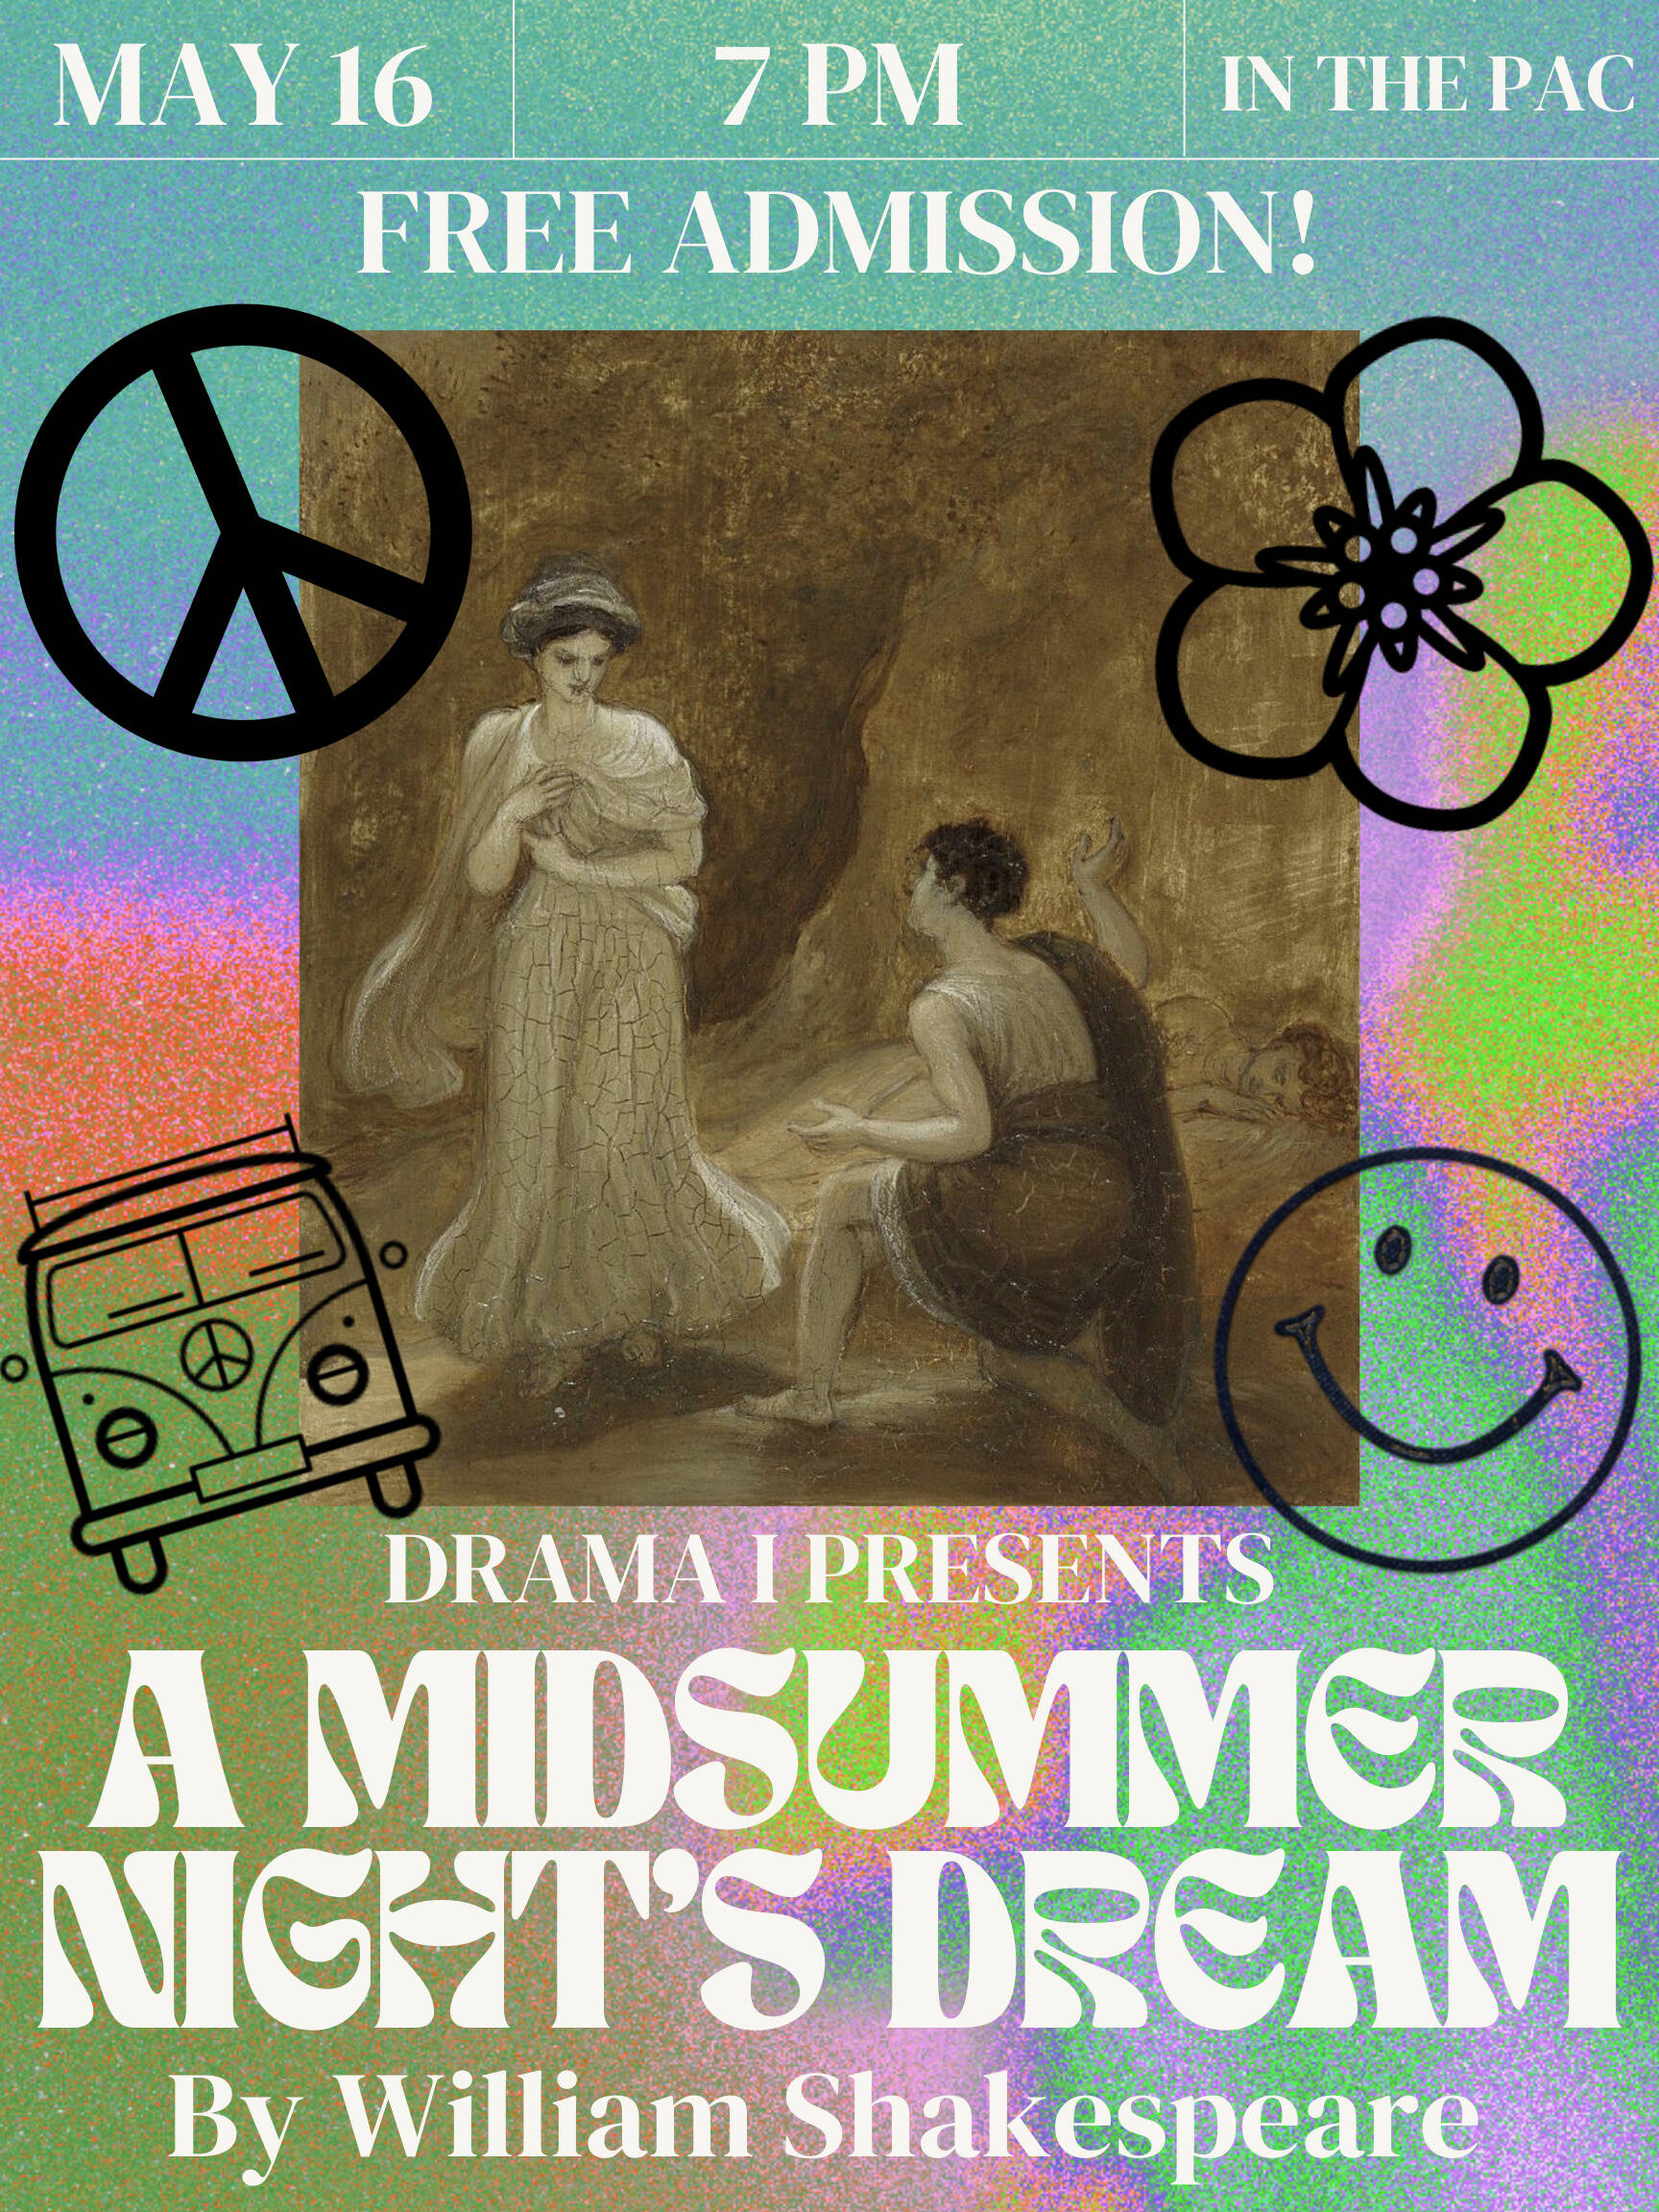 Mercer Island High School’s Drama 1 program will present William Shakespeare’s famous light-hearted, magical comedy “A Midsummer Night’s Dream” at 7 p.m. on May 16 in the school’s Performing Arts Center. Admission is free. Courtesy graphic